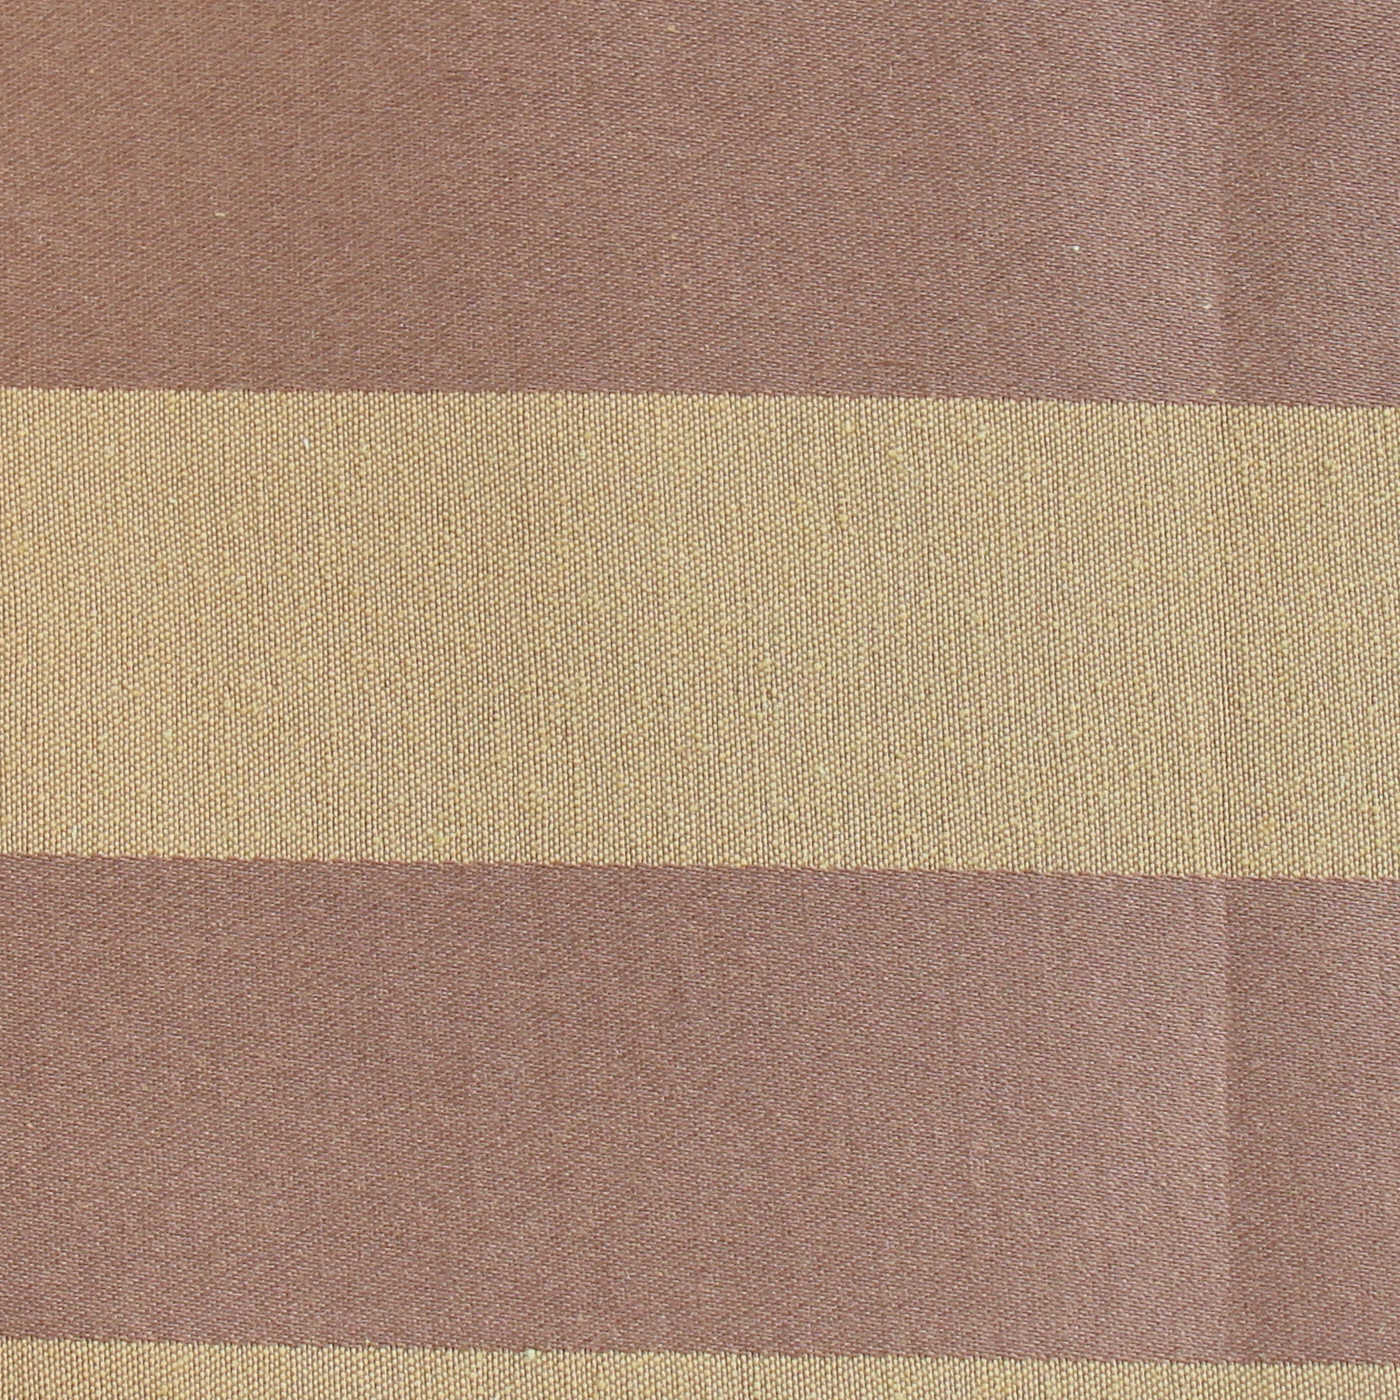 NO 19-45 RS X1 plus NO 20 Fabric Upholstery Sample